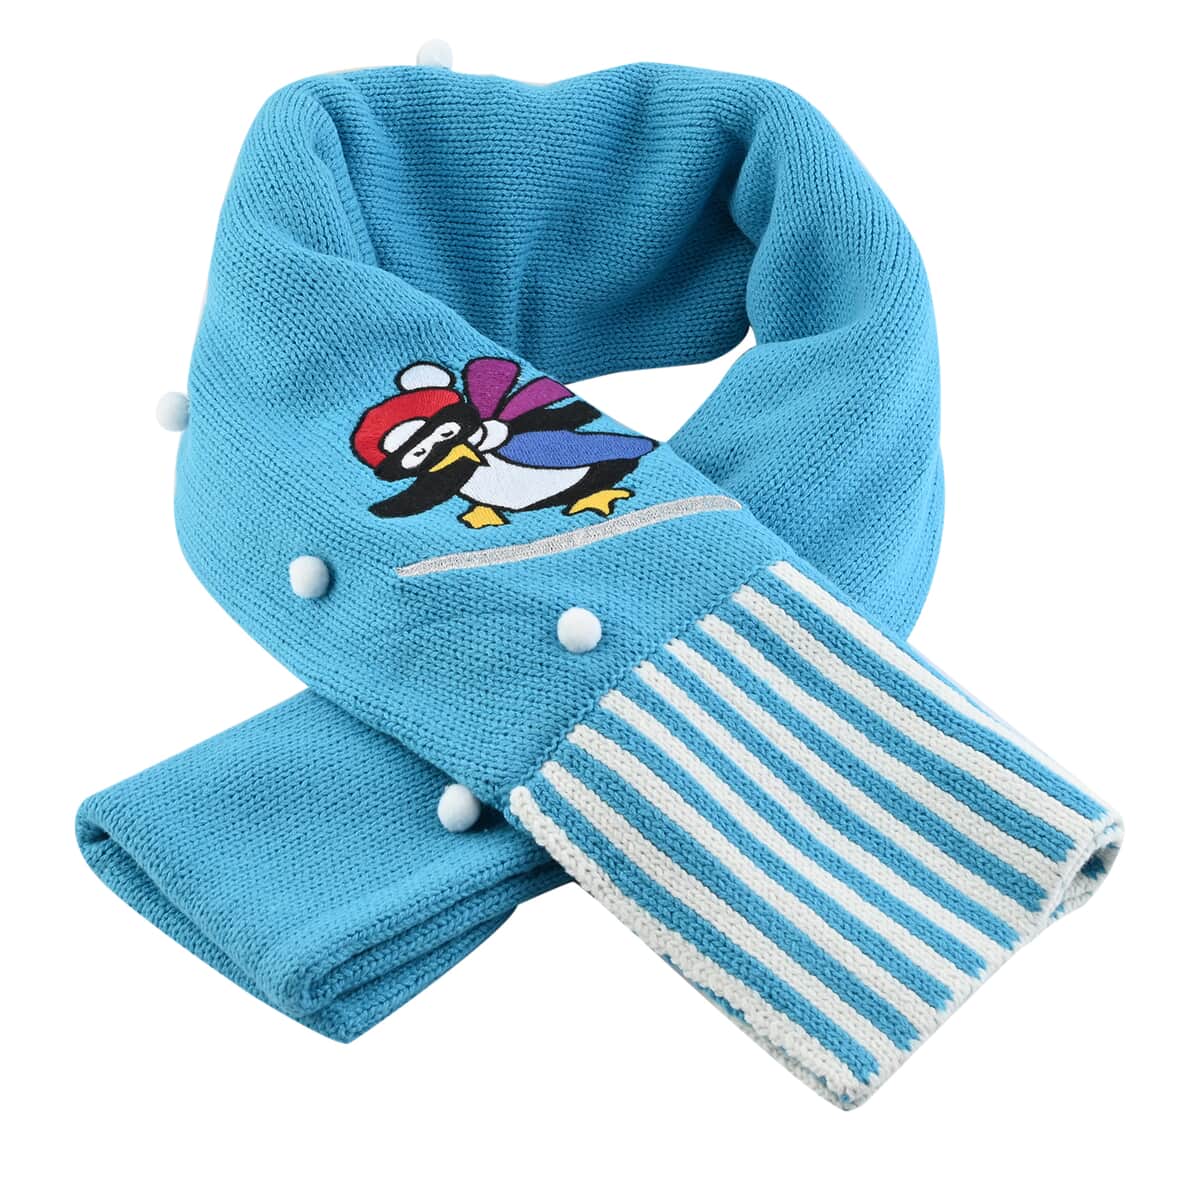 WHOOPI GOLDBERG Holiday Collection Penguin Scarf - One Size Fits Most (MADE IN THE USA) image number 2